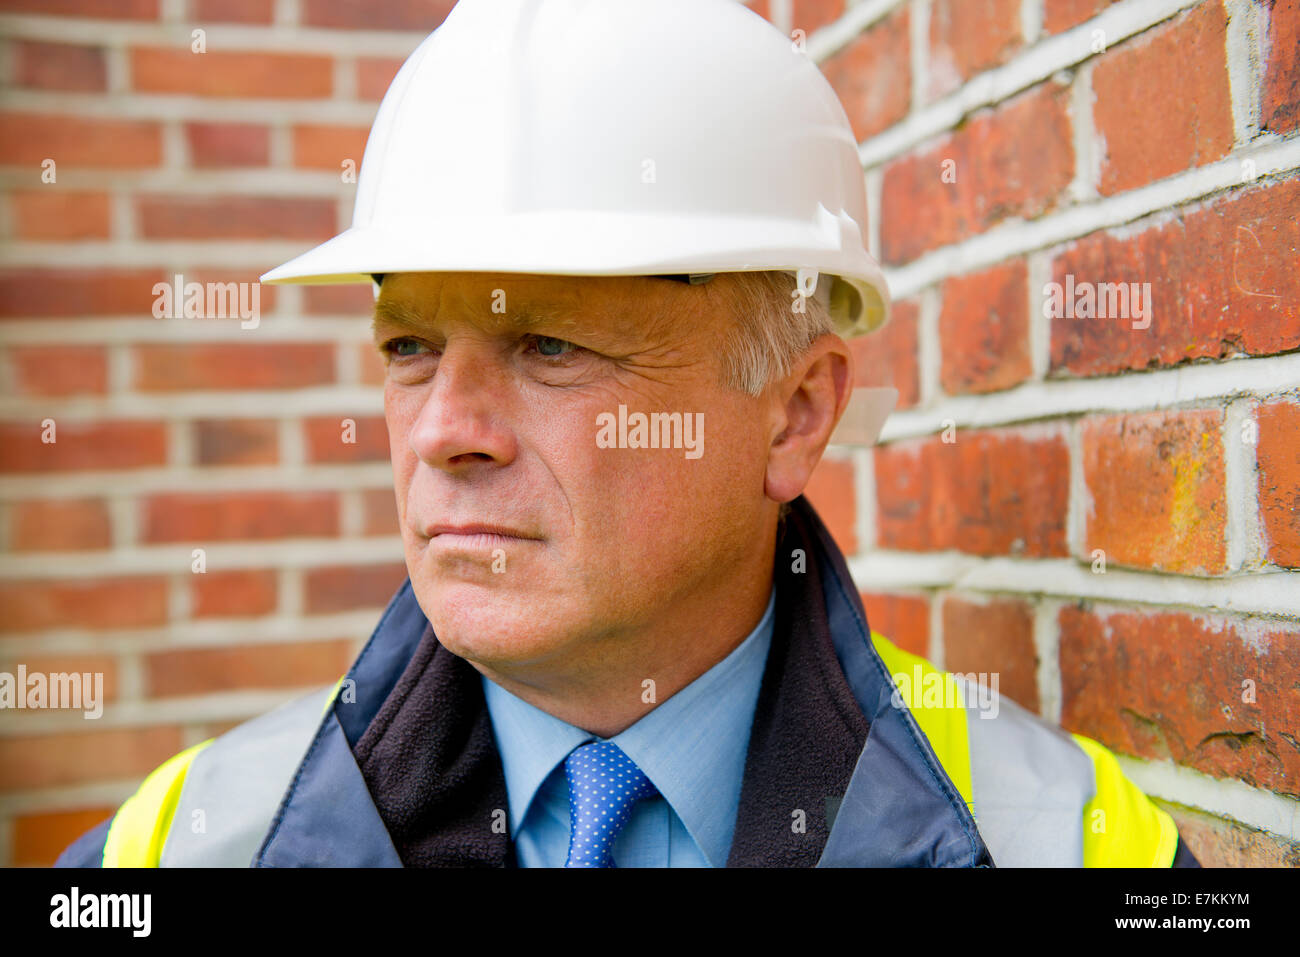 Head and shoulders portrait of a construction engineer against a brick wall background. Stock Photo